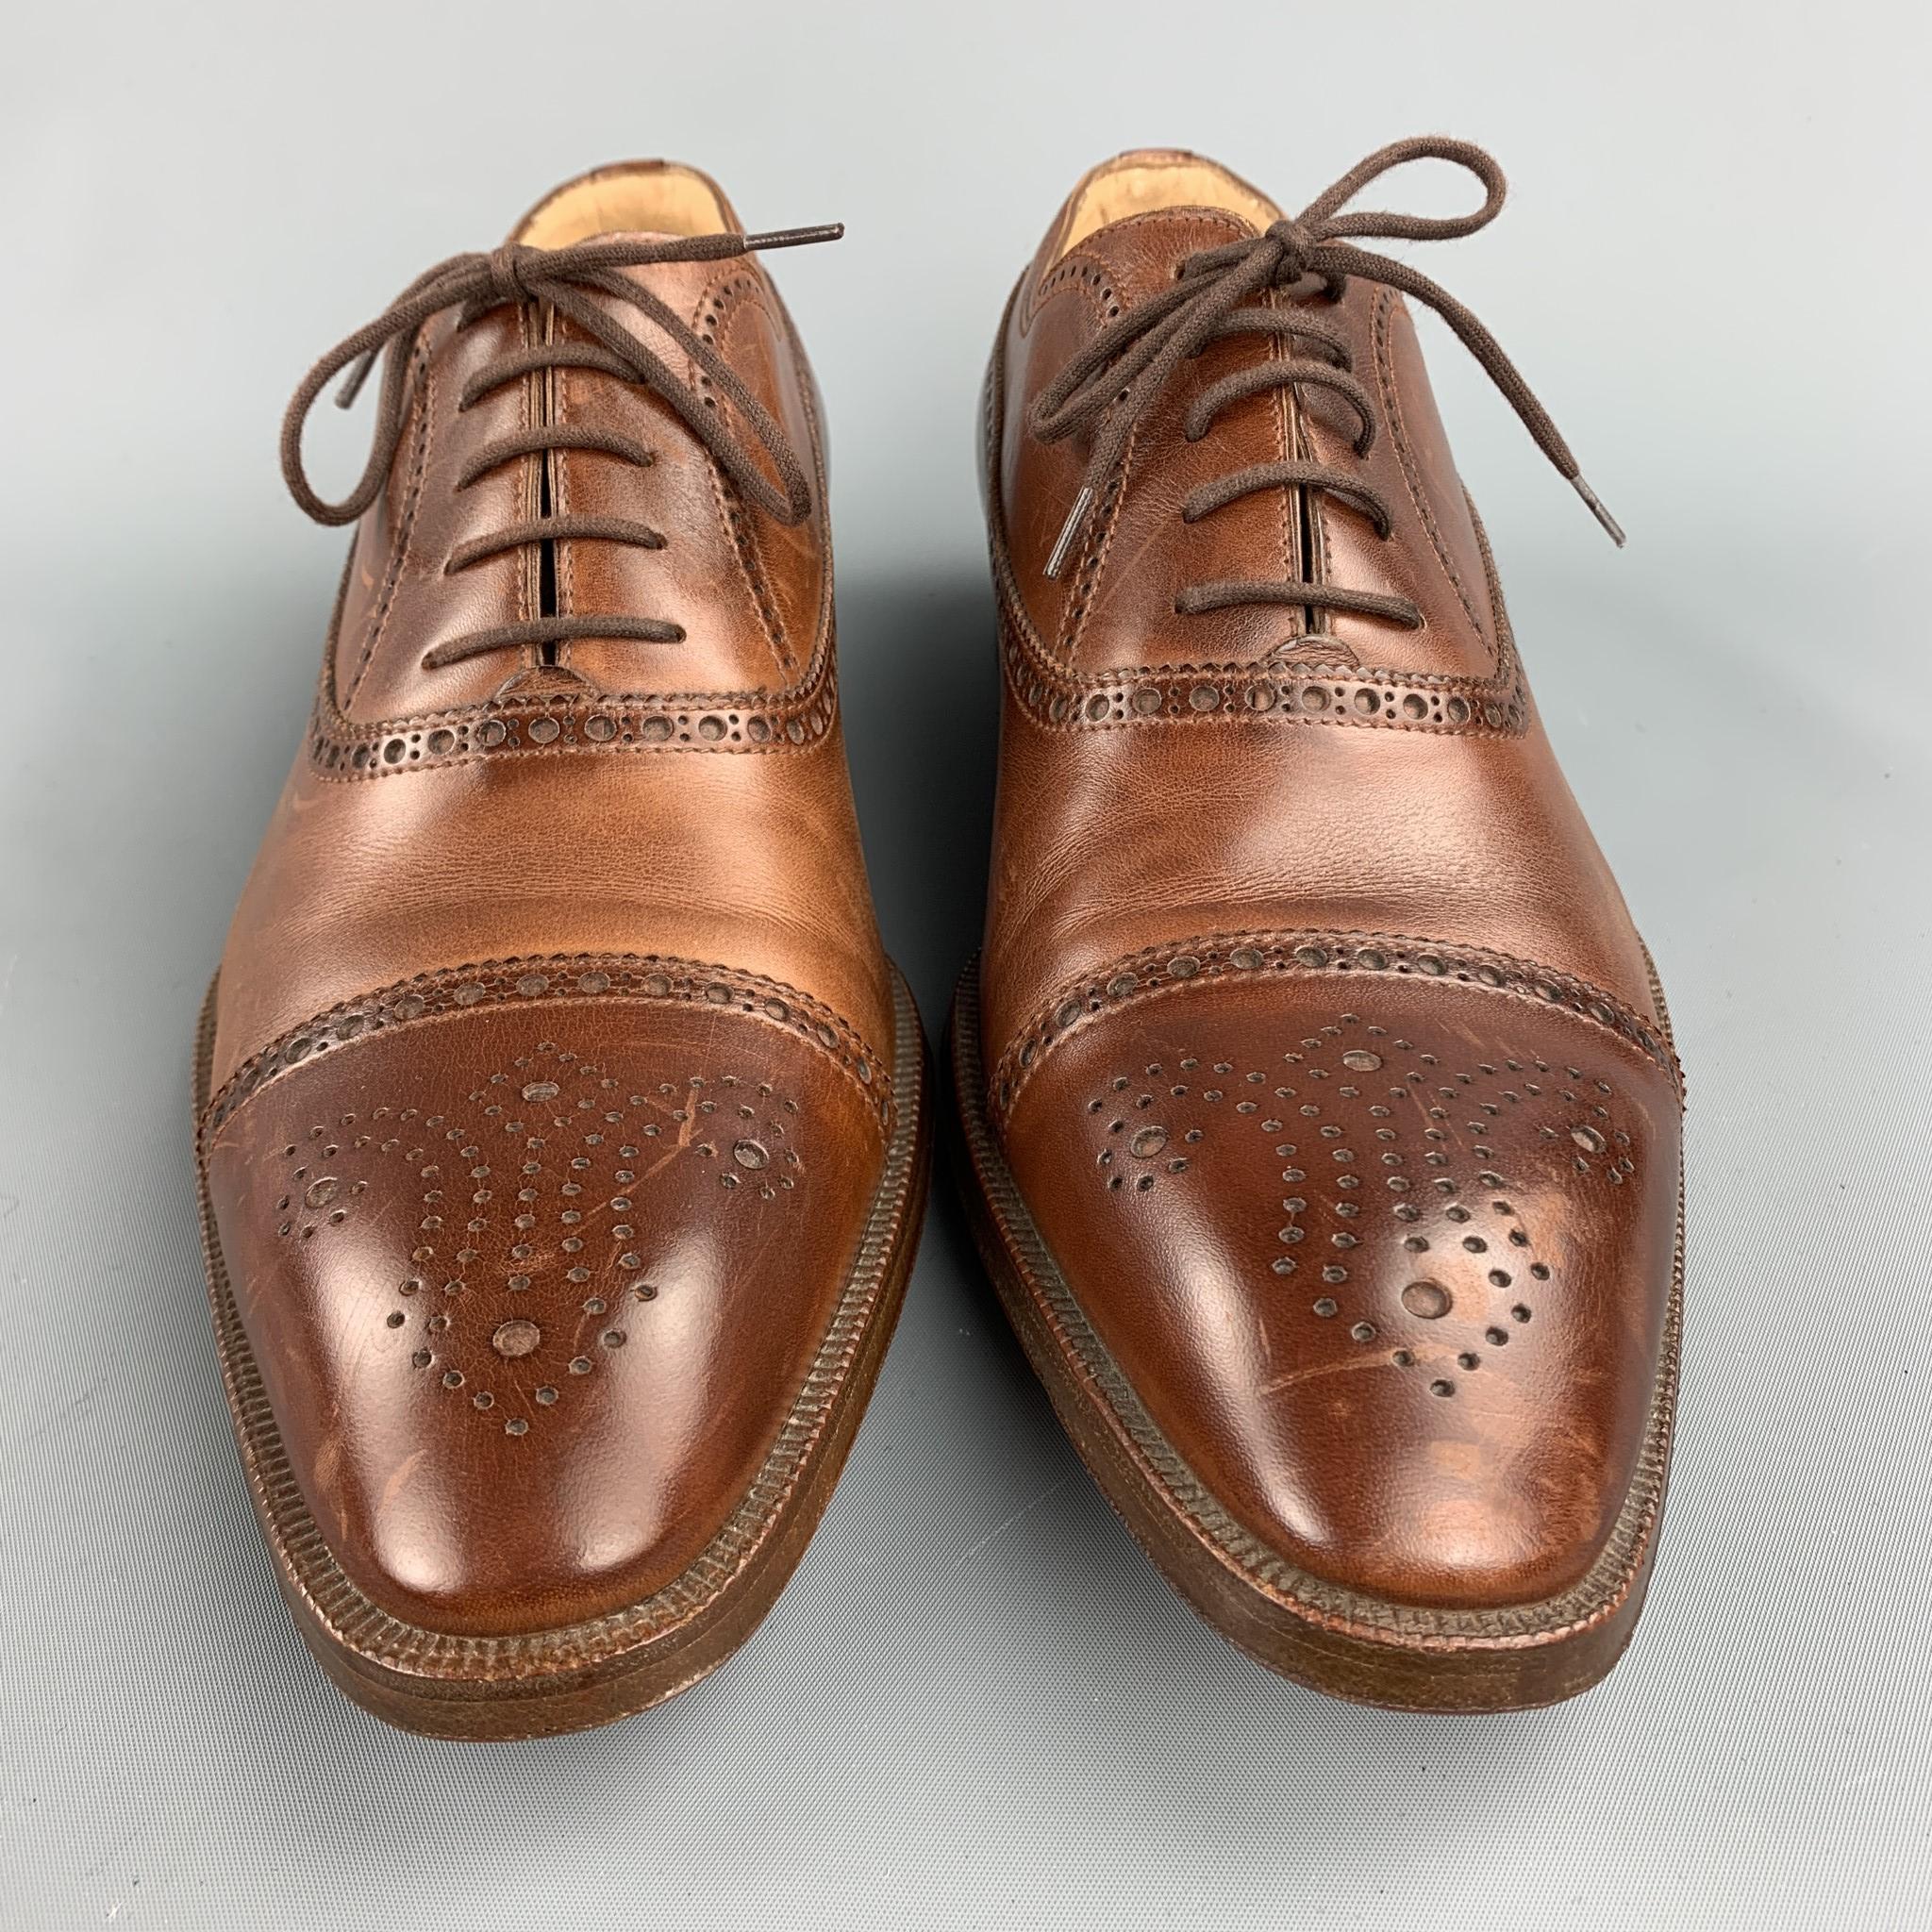 Men's GRAVATI for WILKES BASHFORD Size 9.5 Brown Cap Toe Perforated Lace Up Shoes